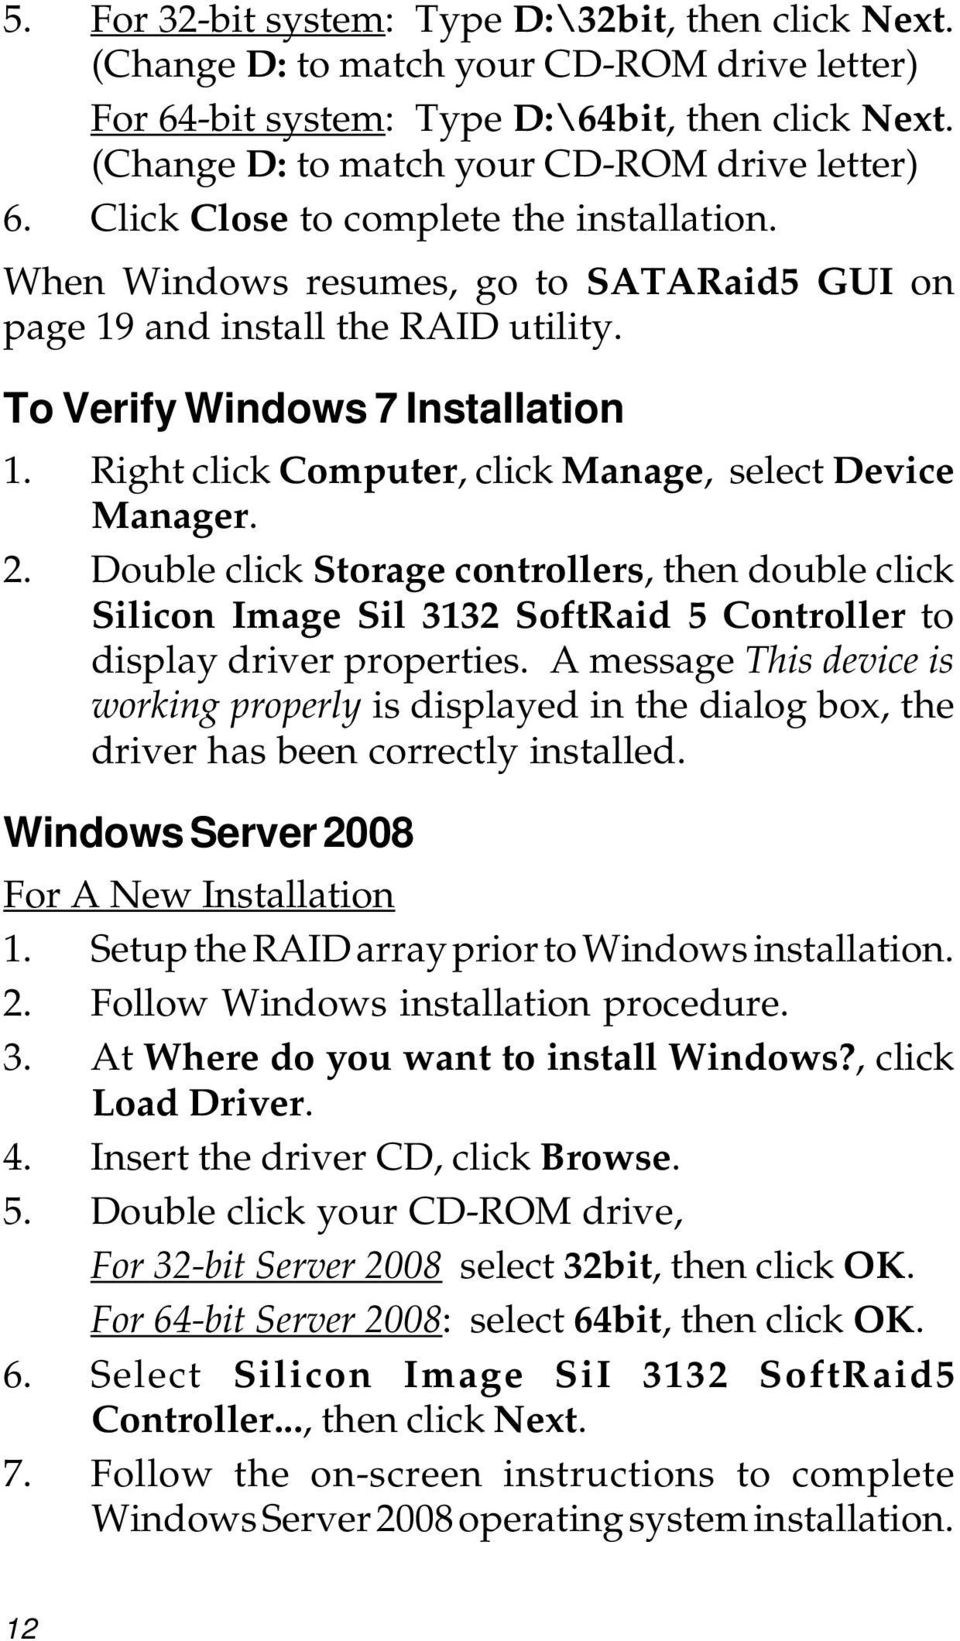 Right click Computer, click Manage, select Device Manager. 2. Double click Storage controllers, then double click Silicon Image Sil 3132 SoftRaid 5 Controller to display driver properties.